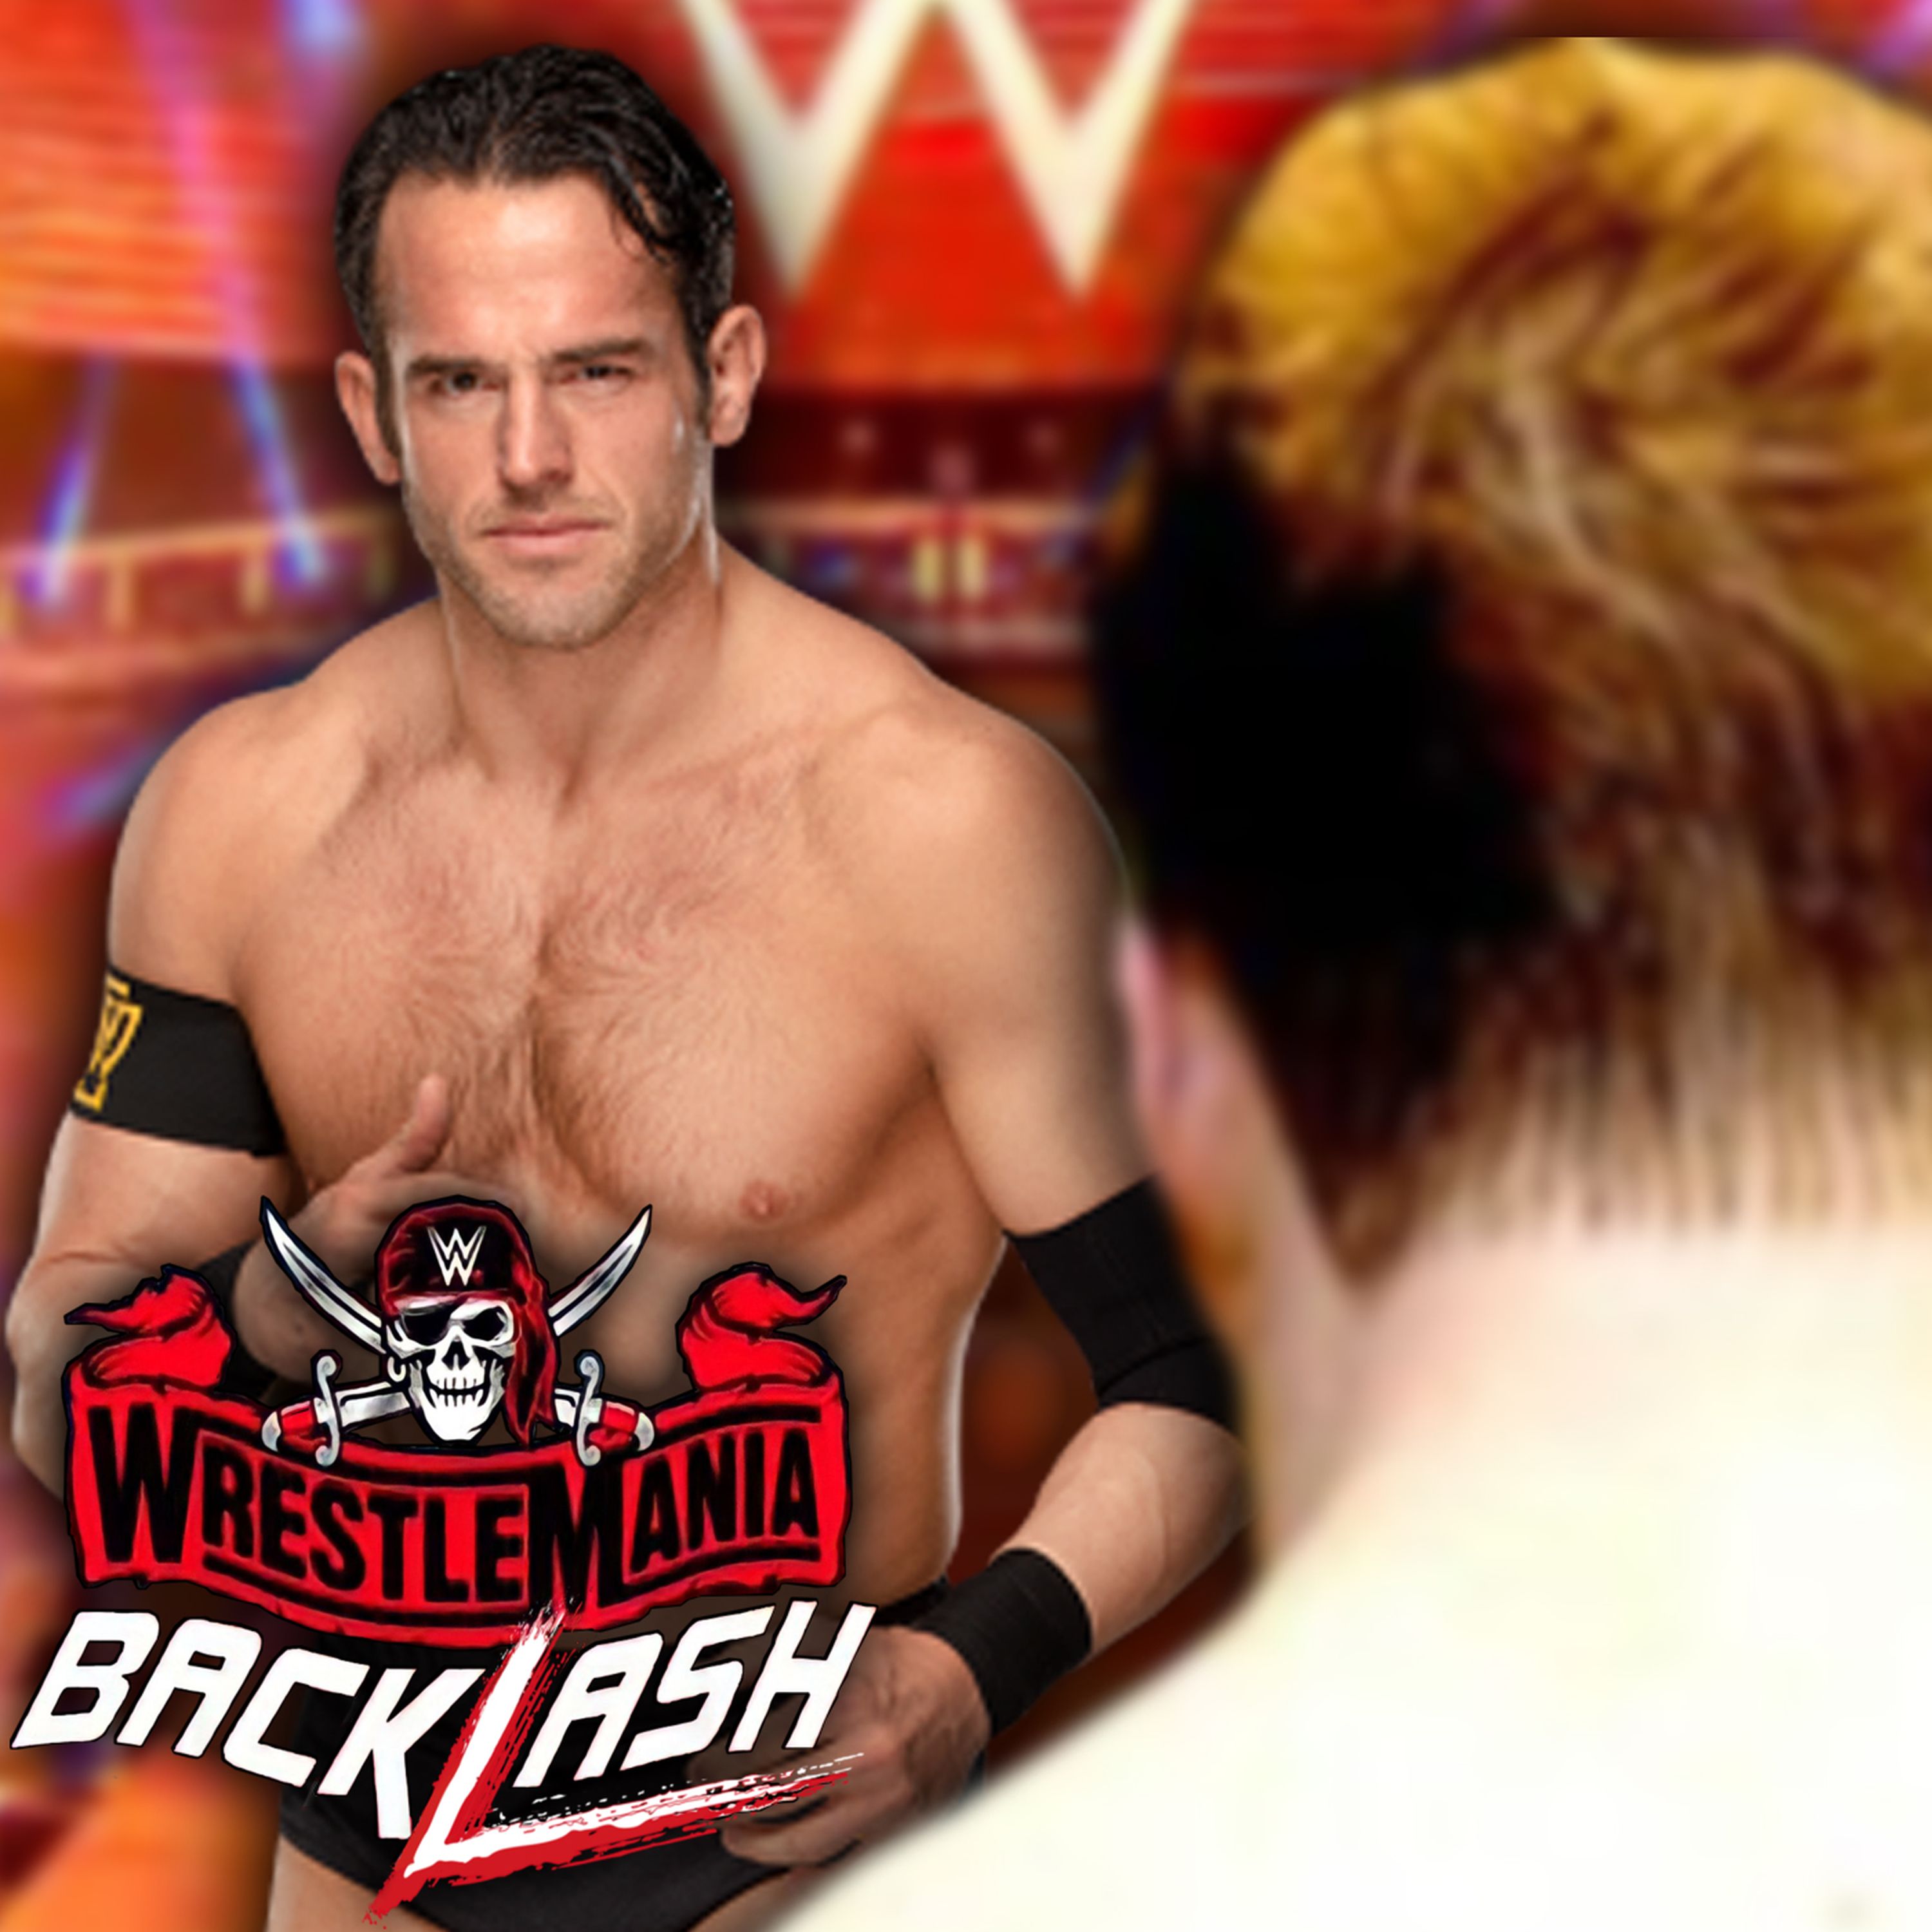 9 Pitches For WWE WrestleMania Backlash